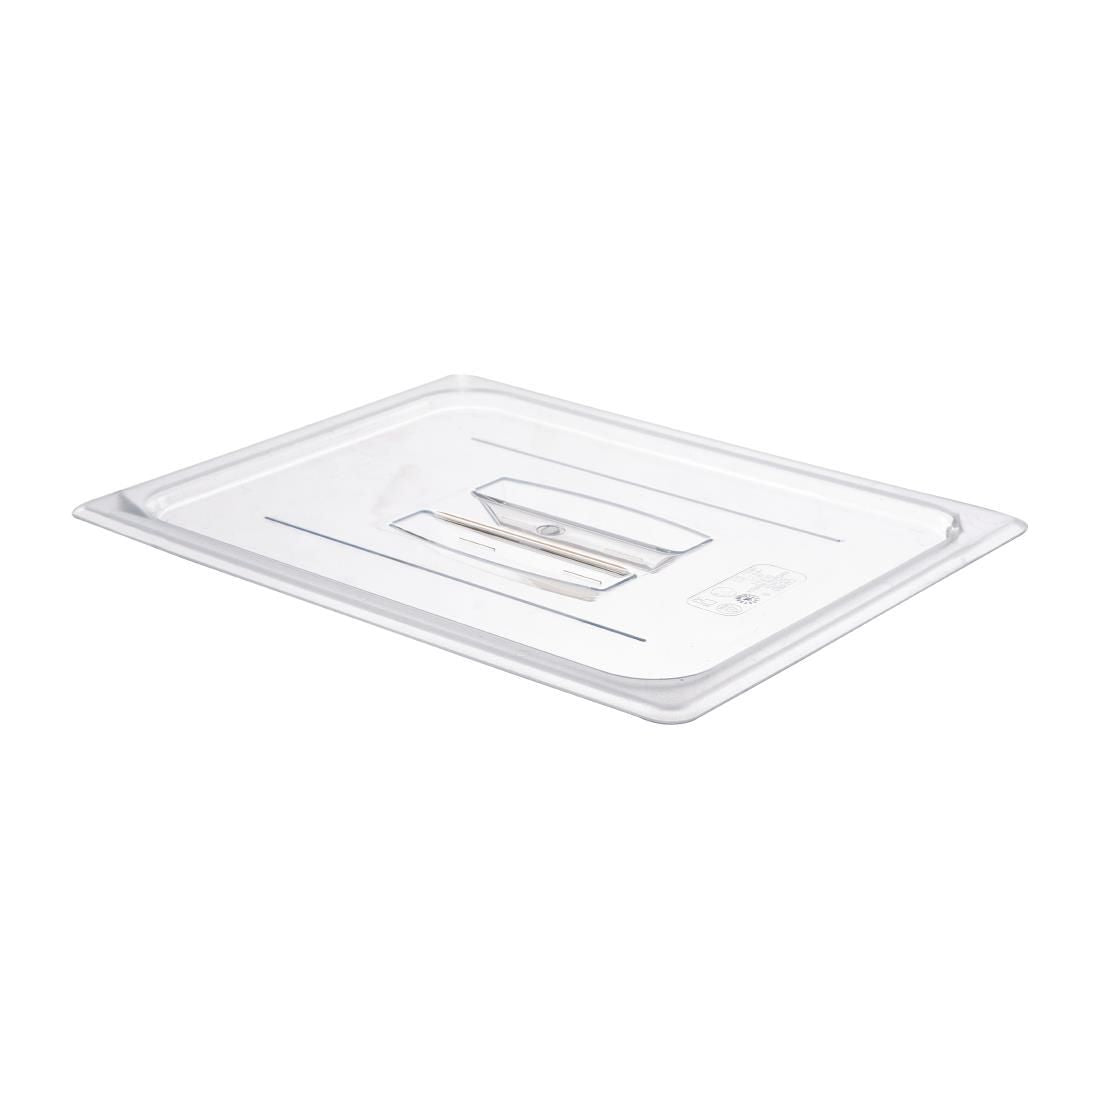 DM732 Cambro Polycarbonate 1/2 Gastronorm Pan Lid JD Catering Equipment Solutions Ltd